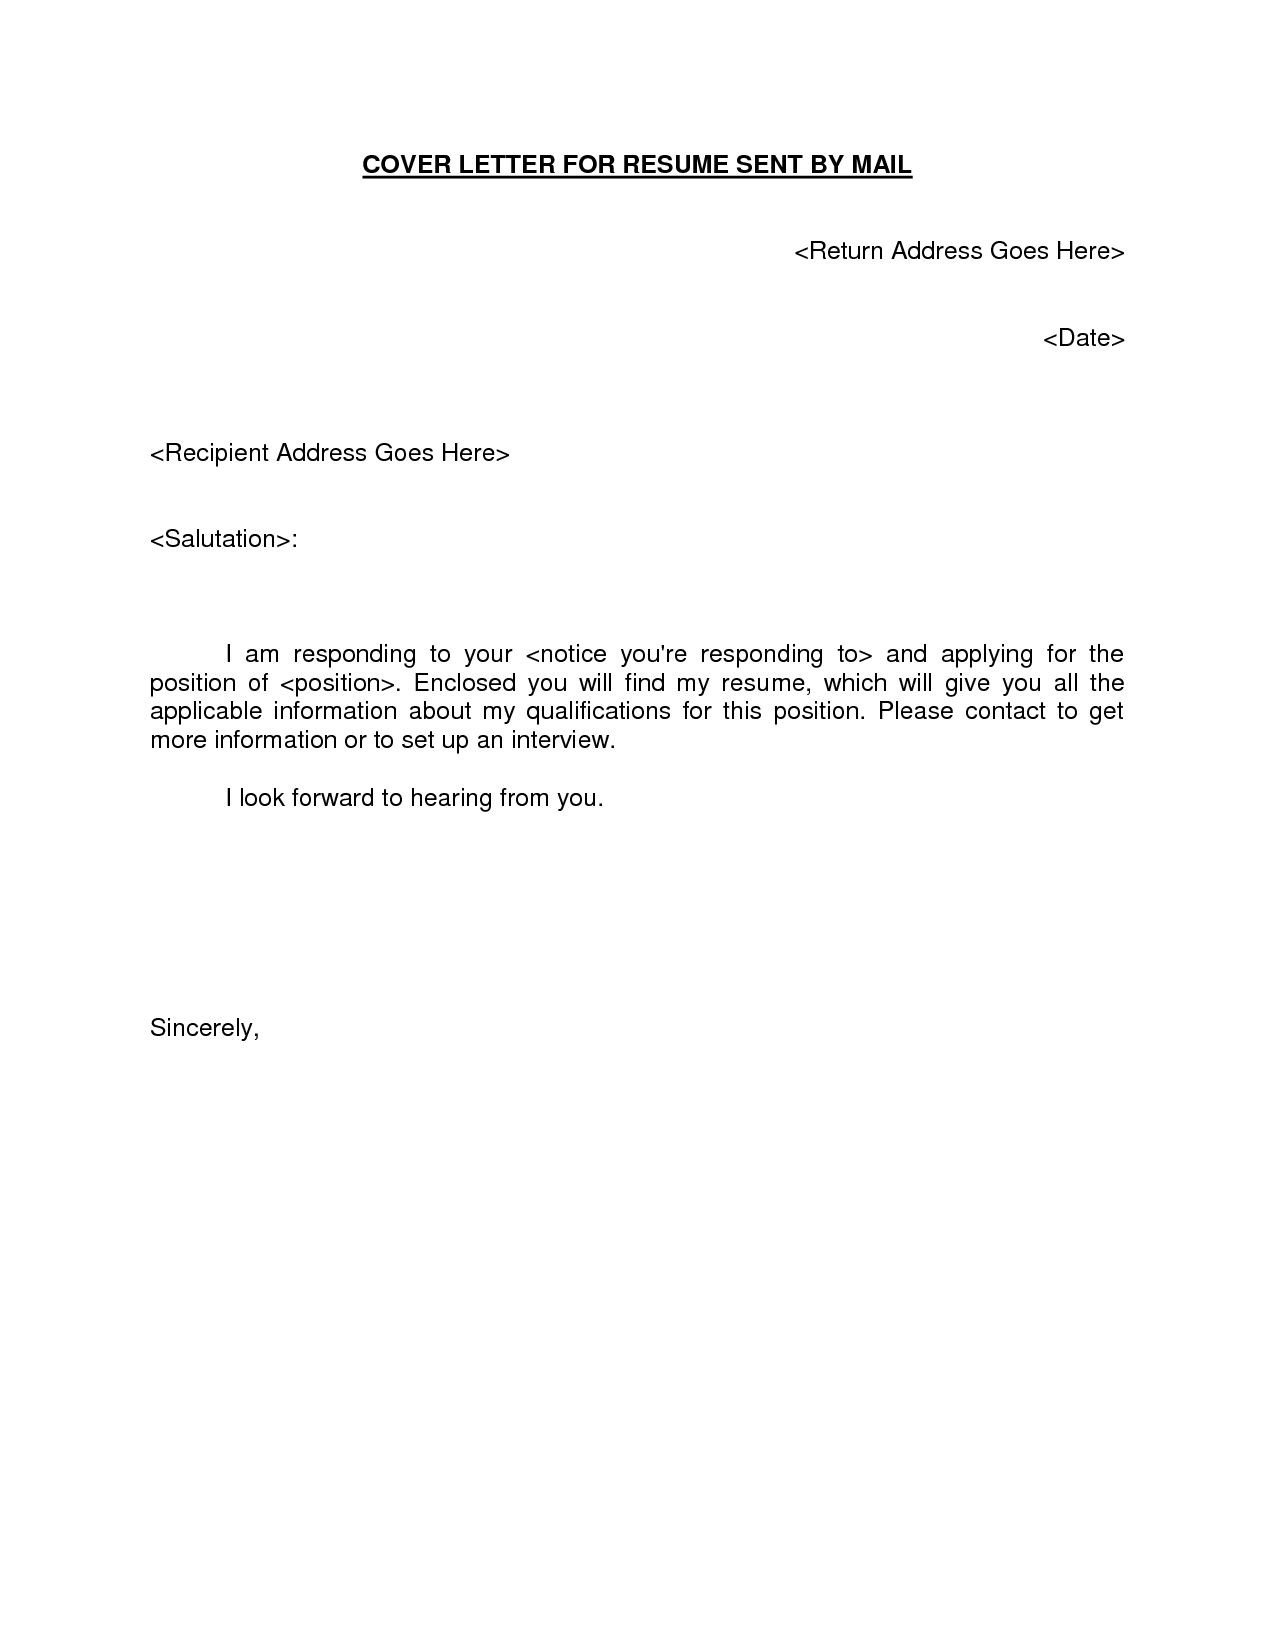 Email Resume and Cover Letter Sample 25lancarrezekiq Email Cover Letter Cover Letter for Resume, Email Cover …